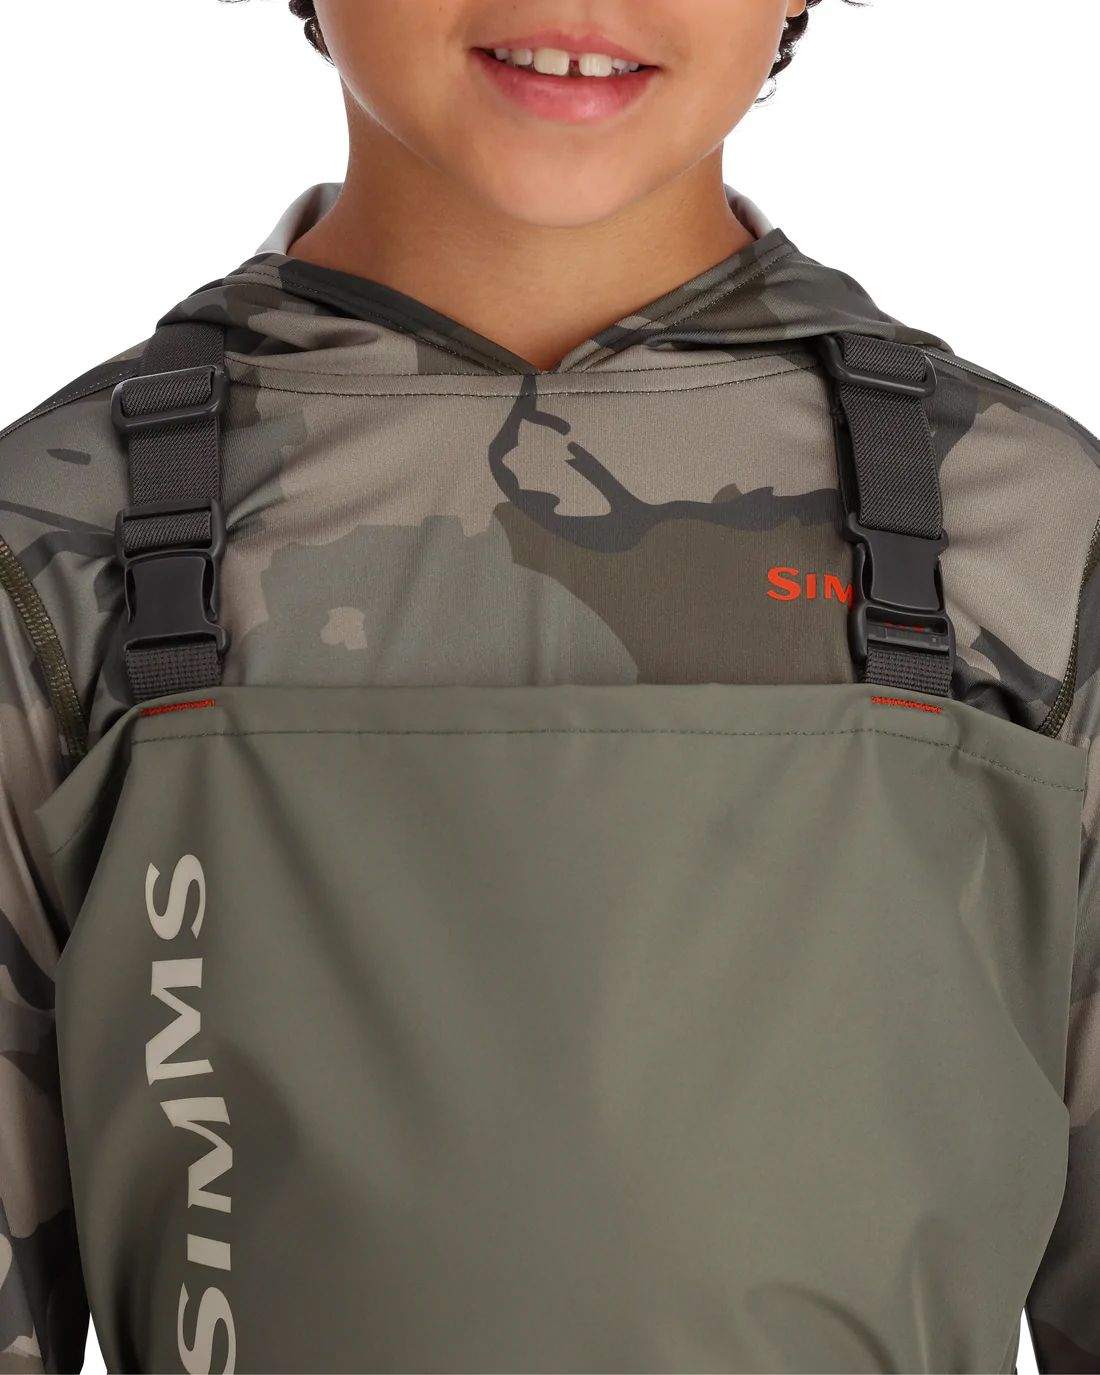 Dick's Sporting Goods Simms Youth Tributary Stockingfoot Waders